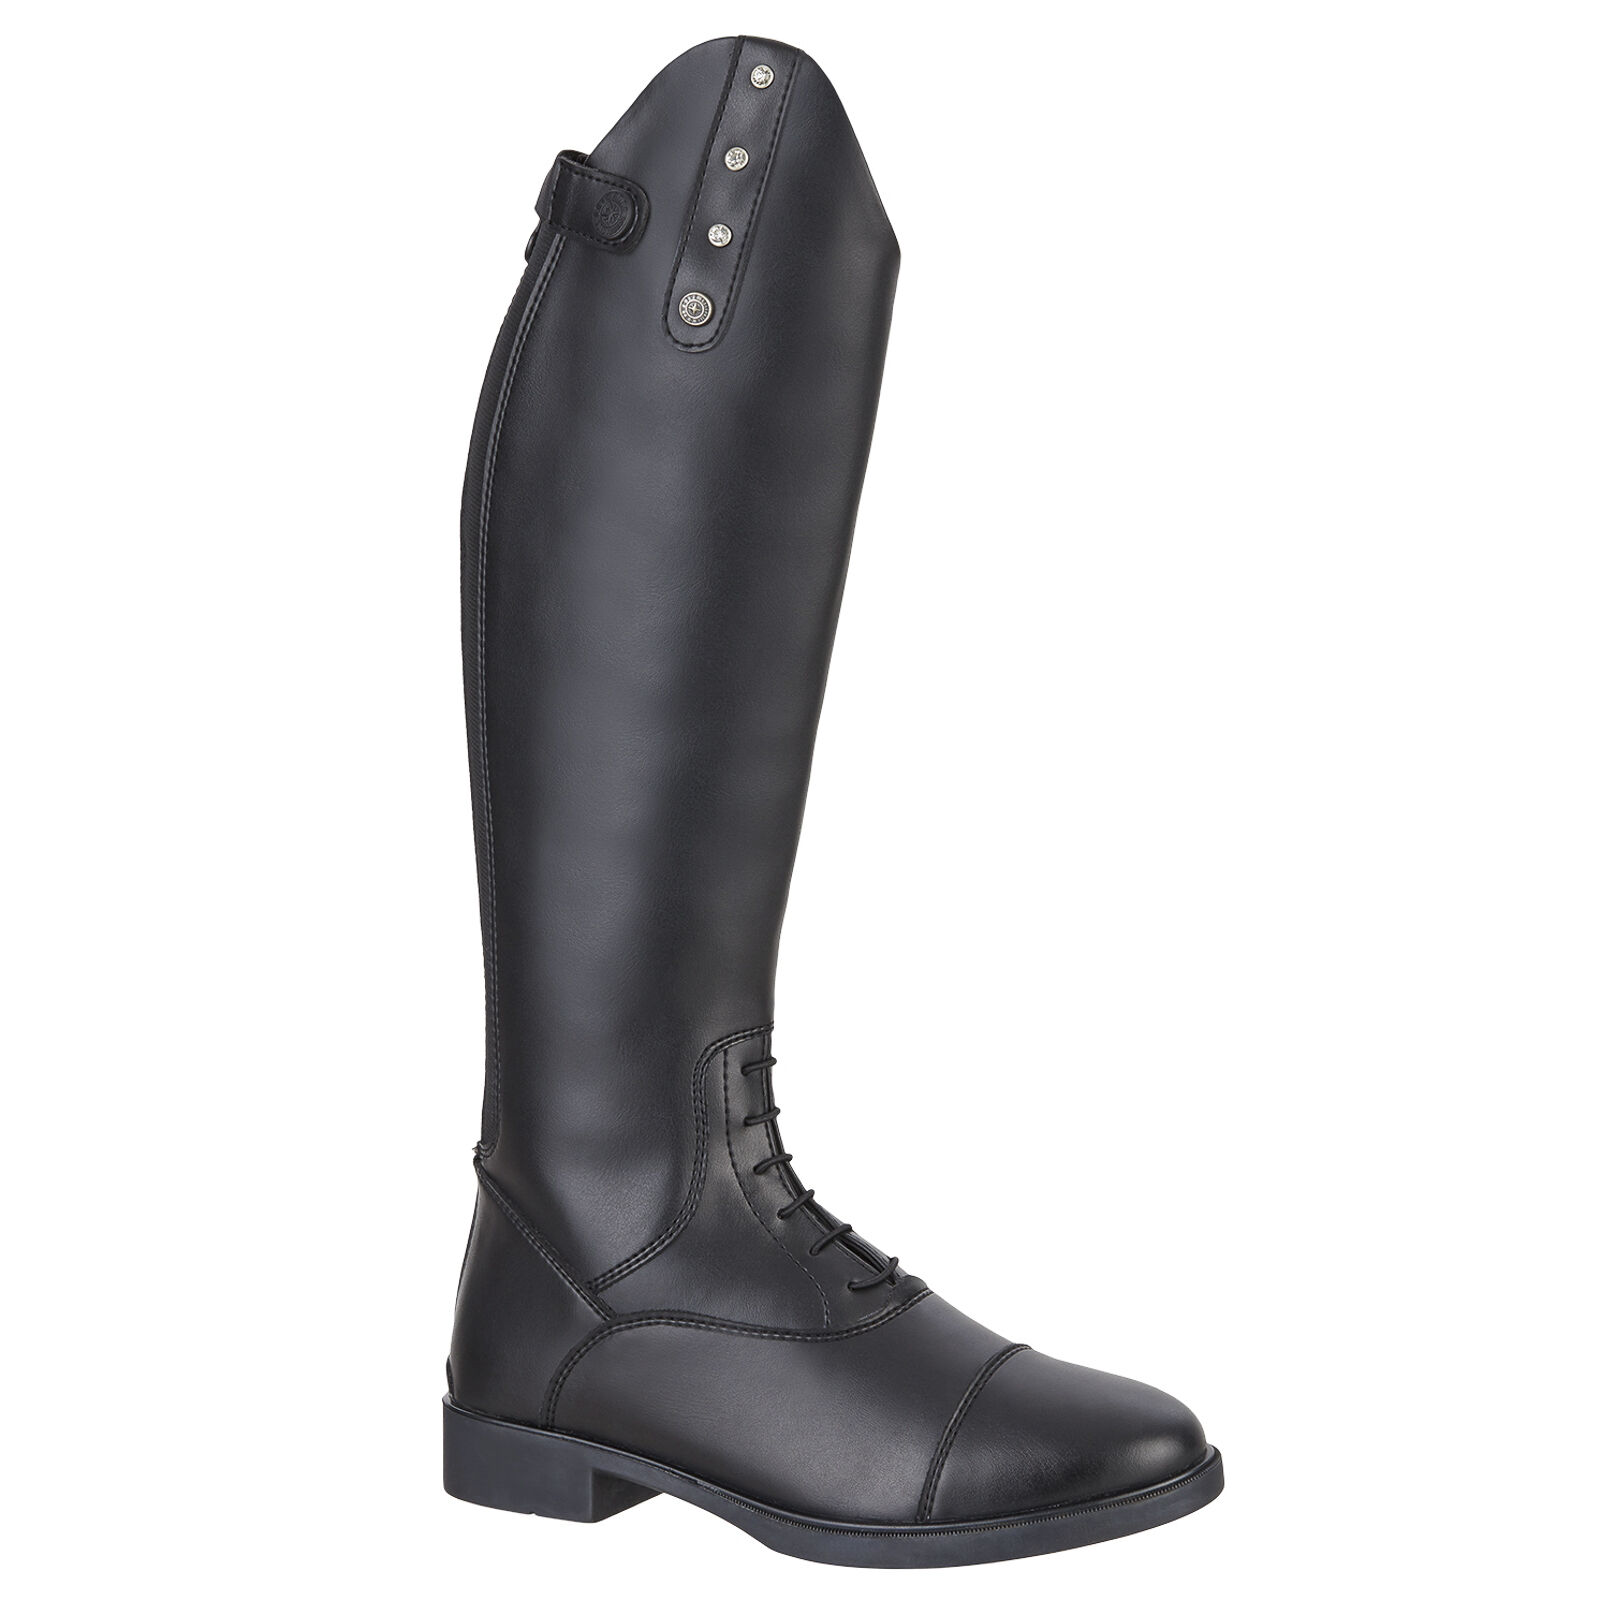 Buy affordable Kids Riding Boots now 